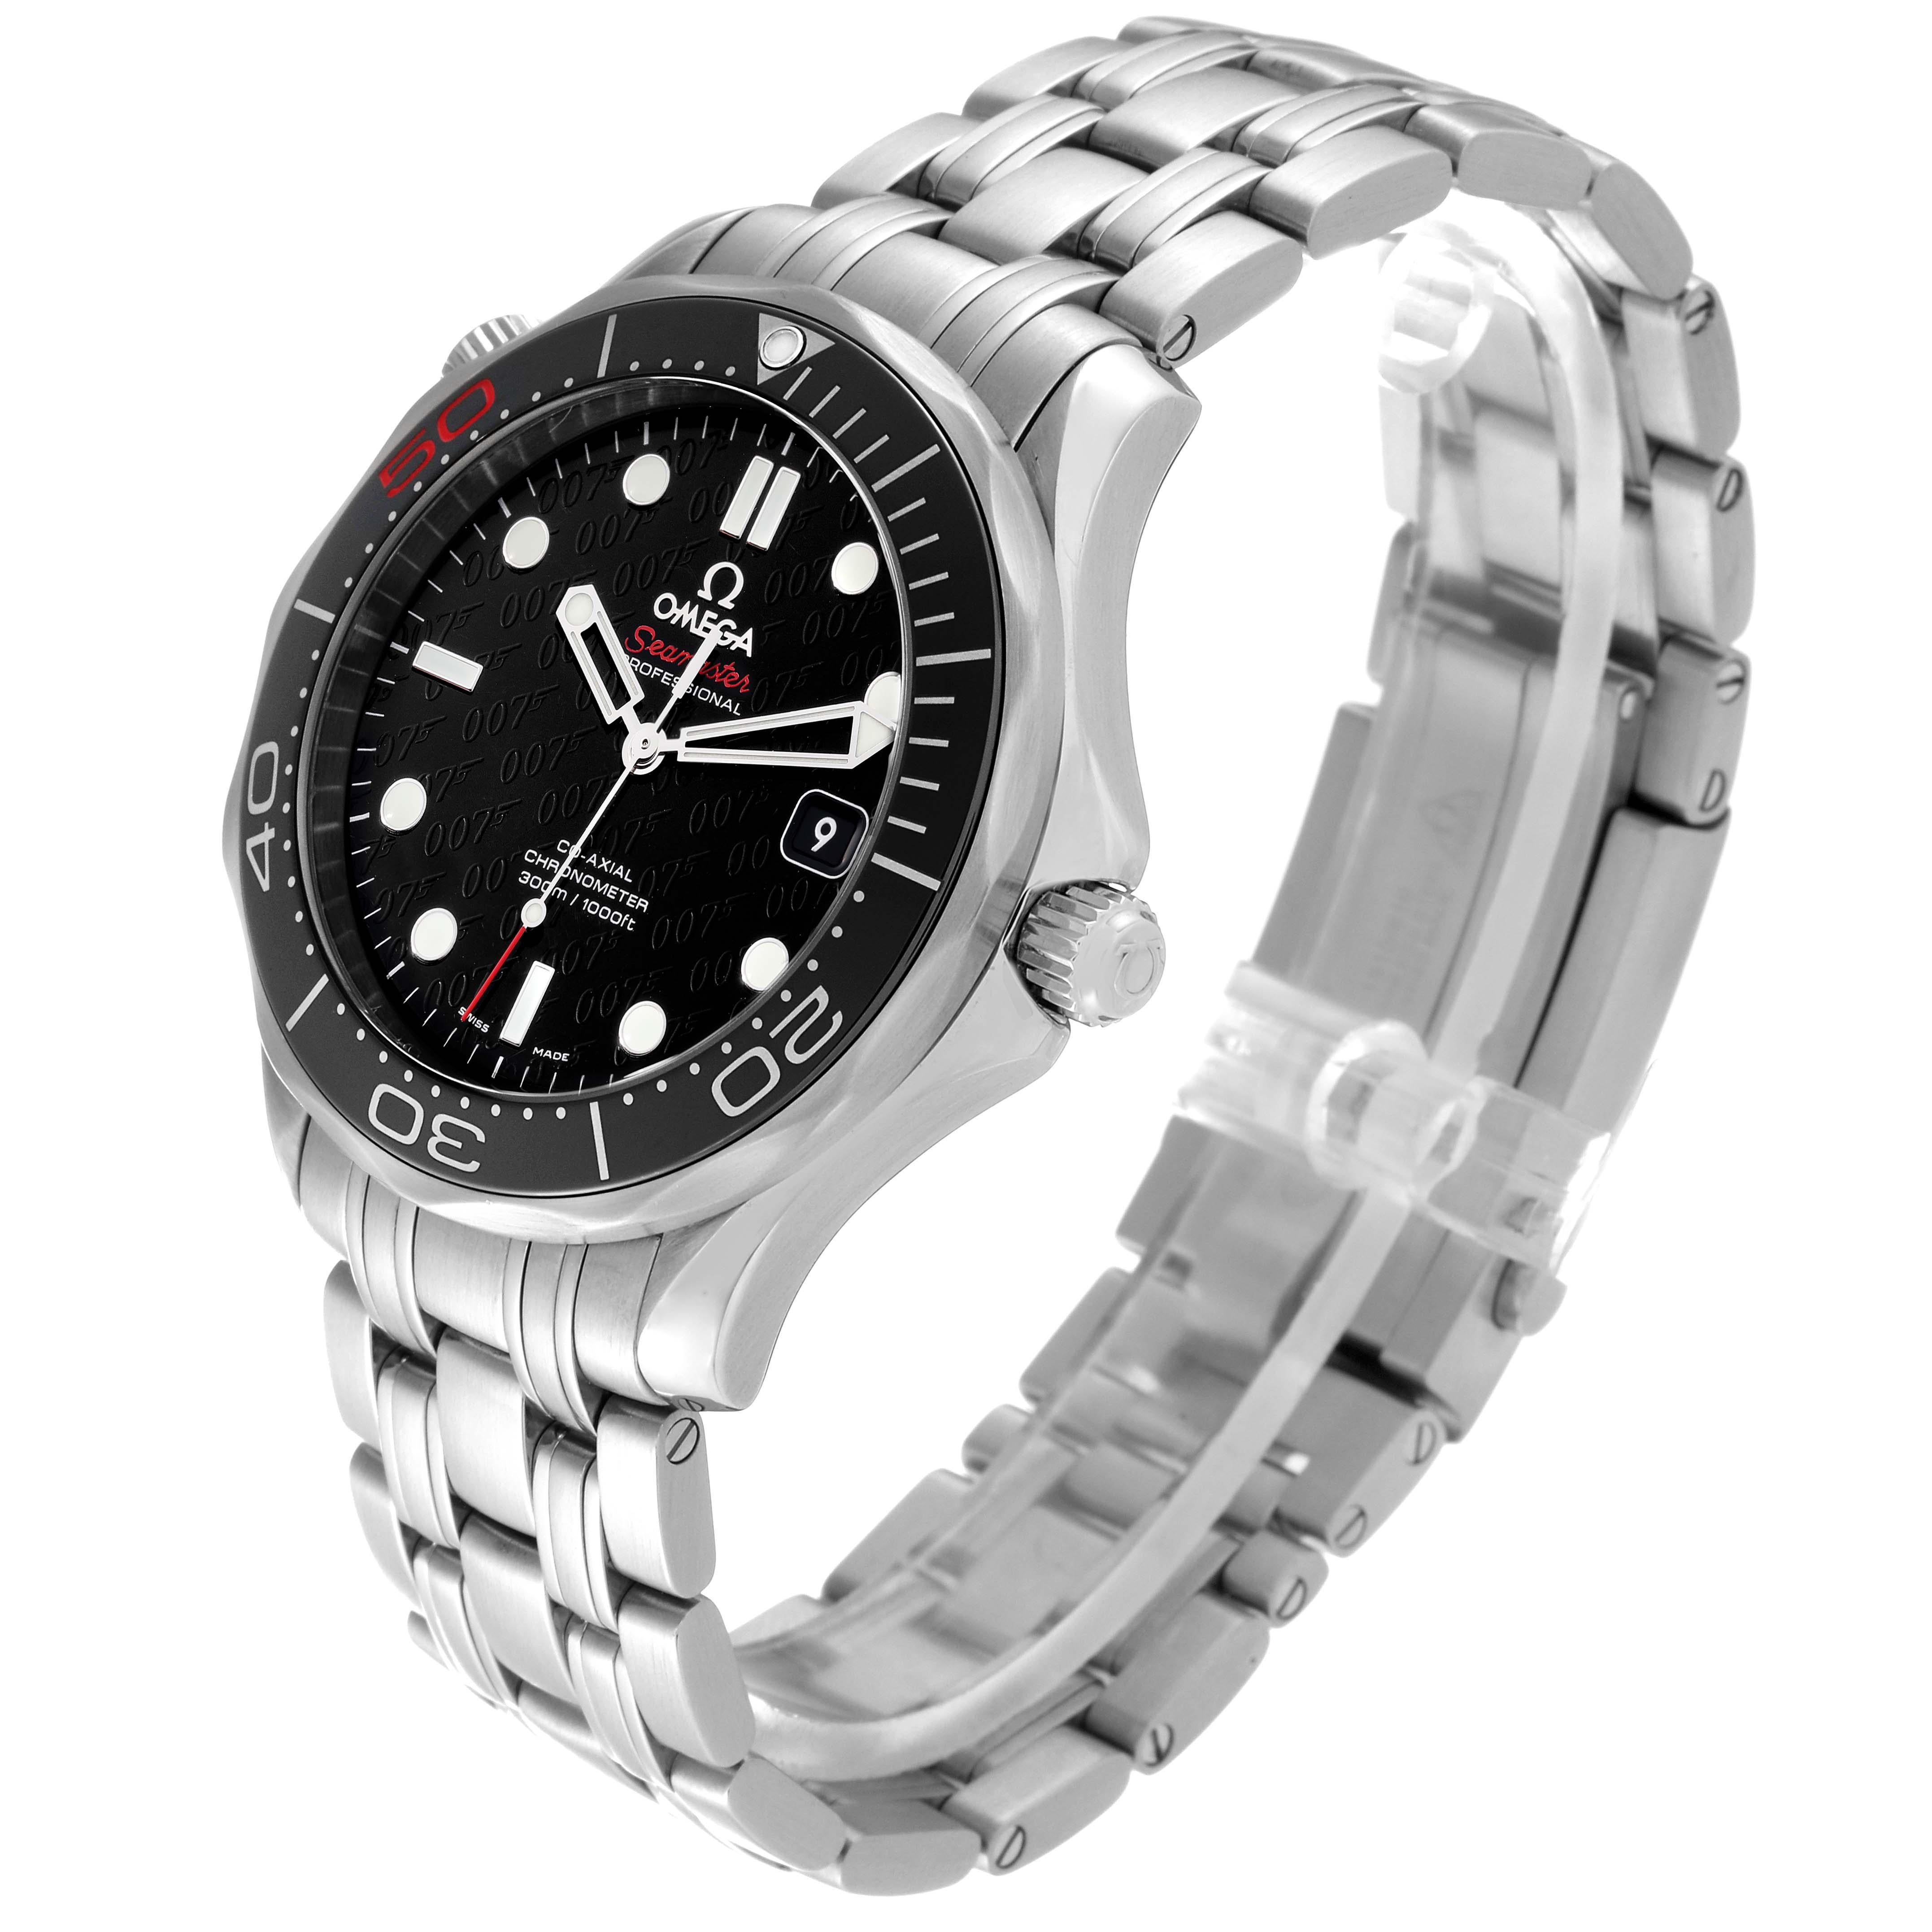 Omega Seamaster Limited Edition Bond 007 Steel Mens Watch 212.30.41.20.01.005 For Sale 3